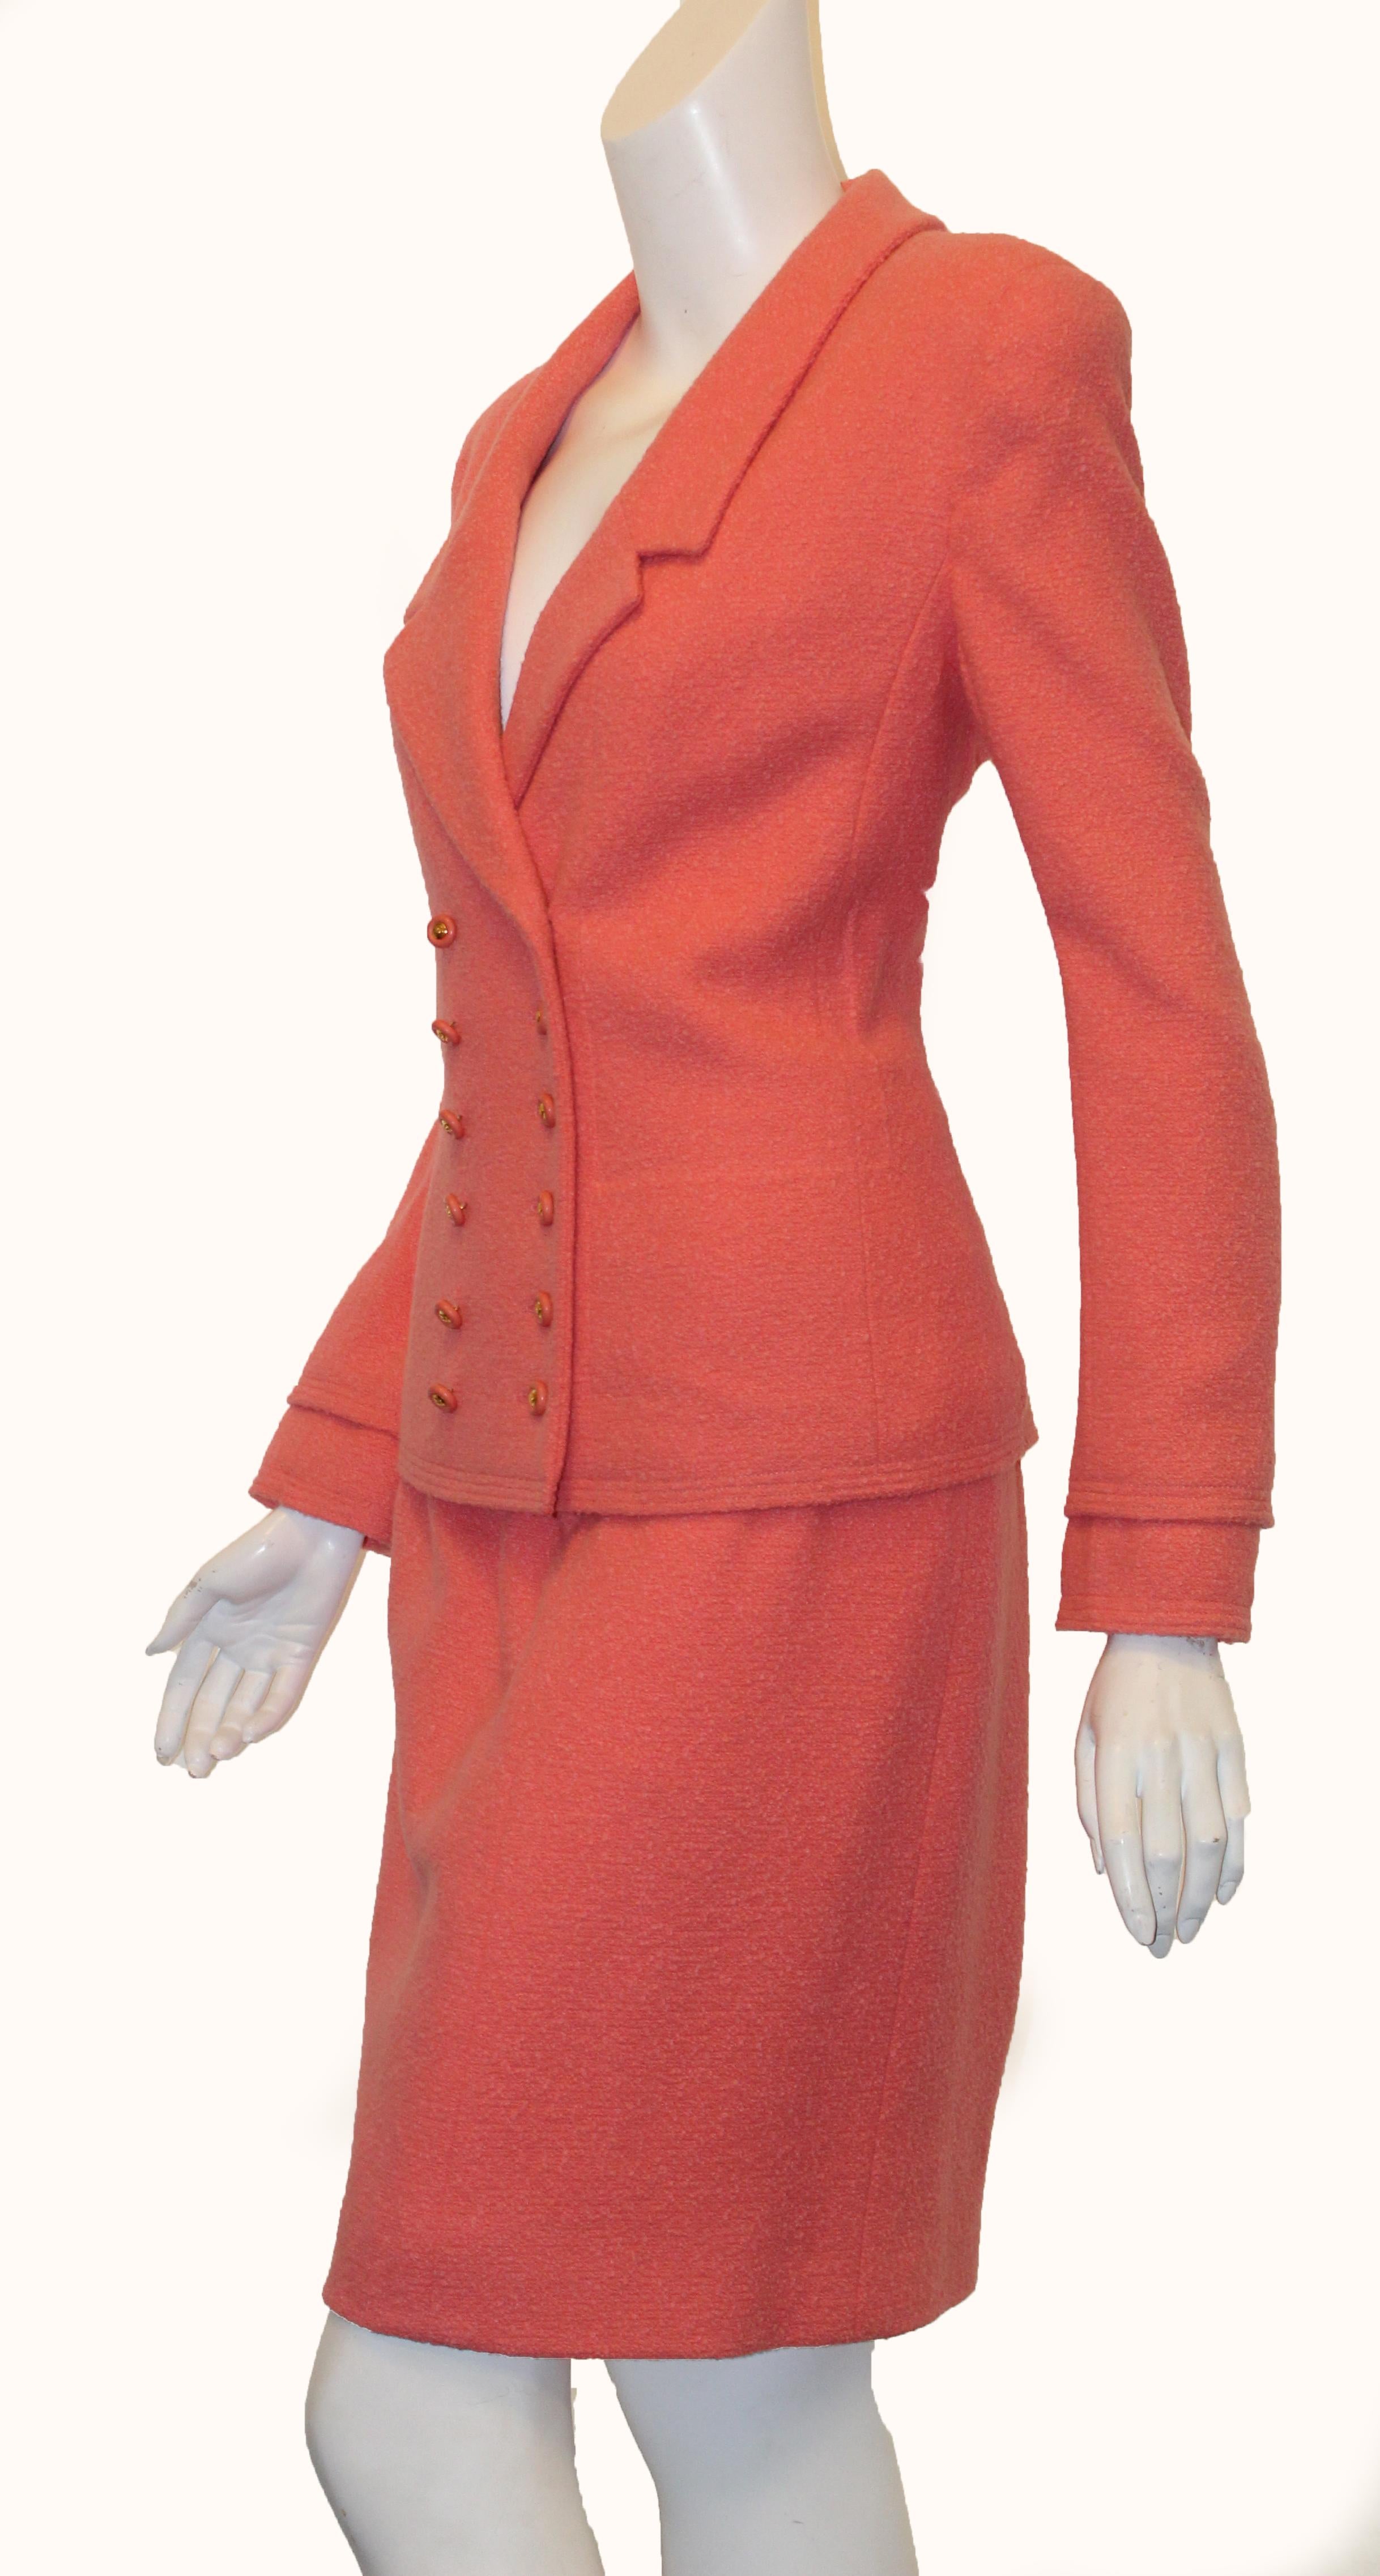 Chanel pink salmon wool and mohair double breasted suit includes 12 CC buttons at front for closure.  This multi panel suit with notch collar and long sleeve with turn down cuff is in excellent condition.  The skirt has a 3 buttoned vent at back and